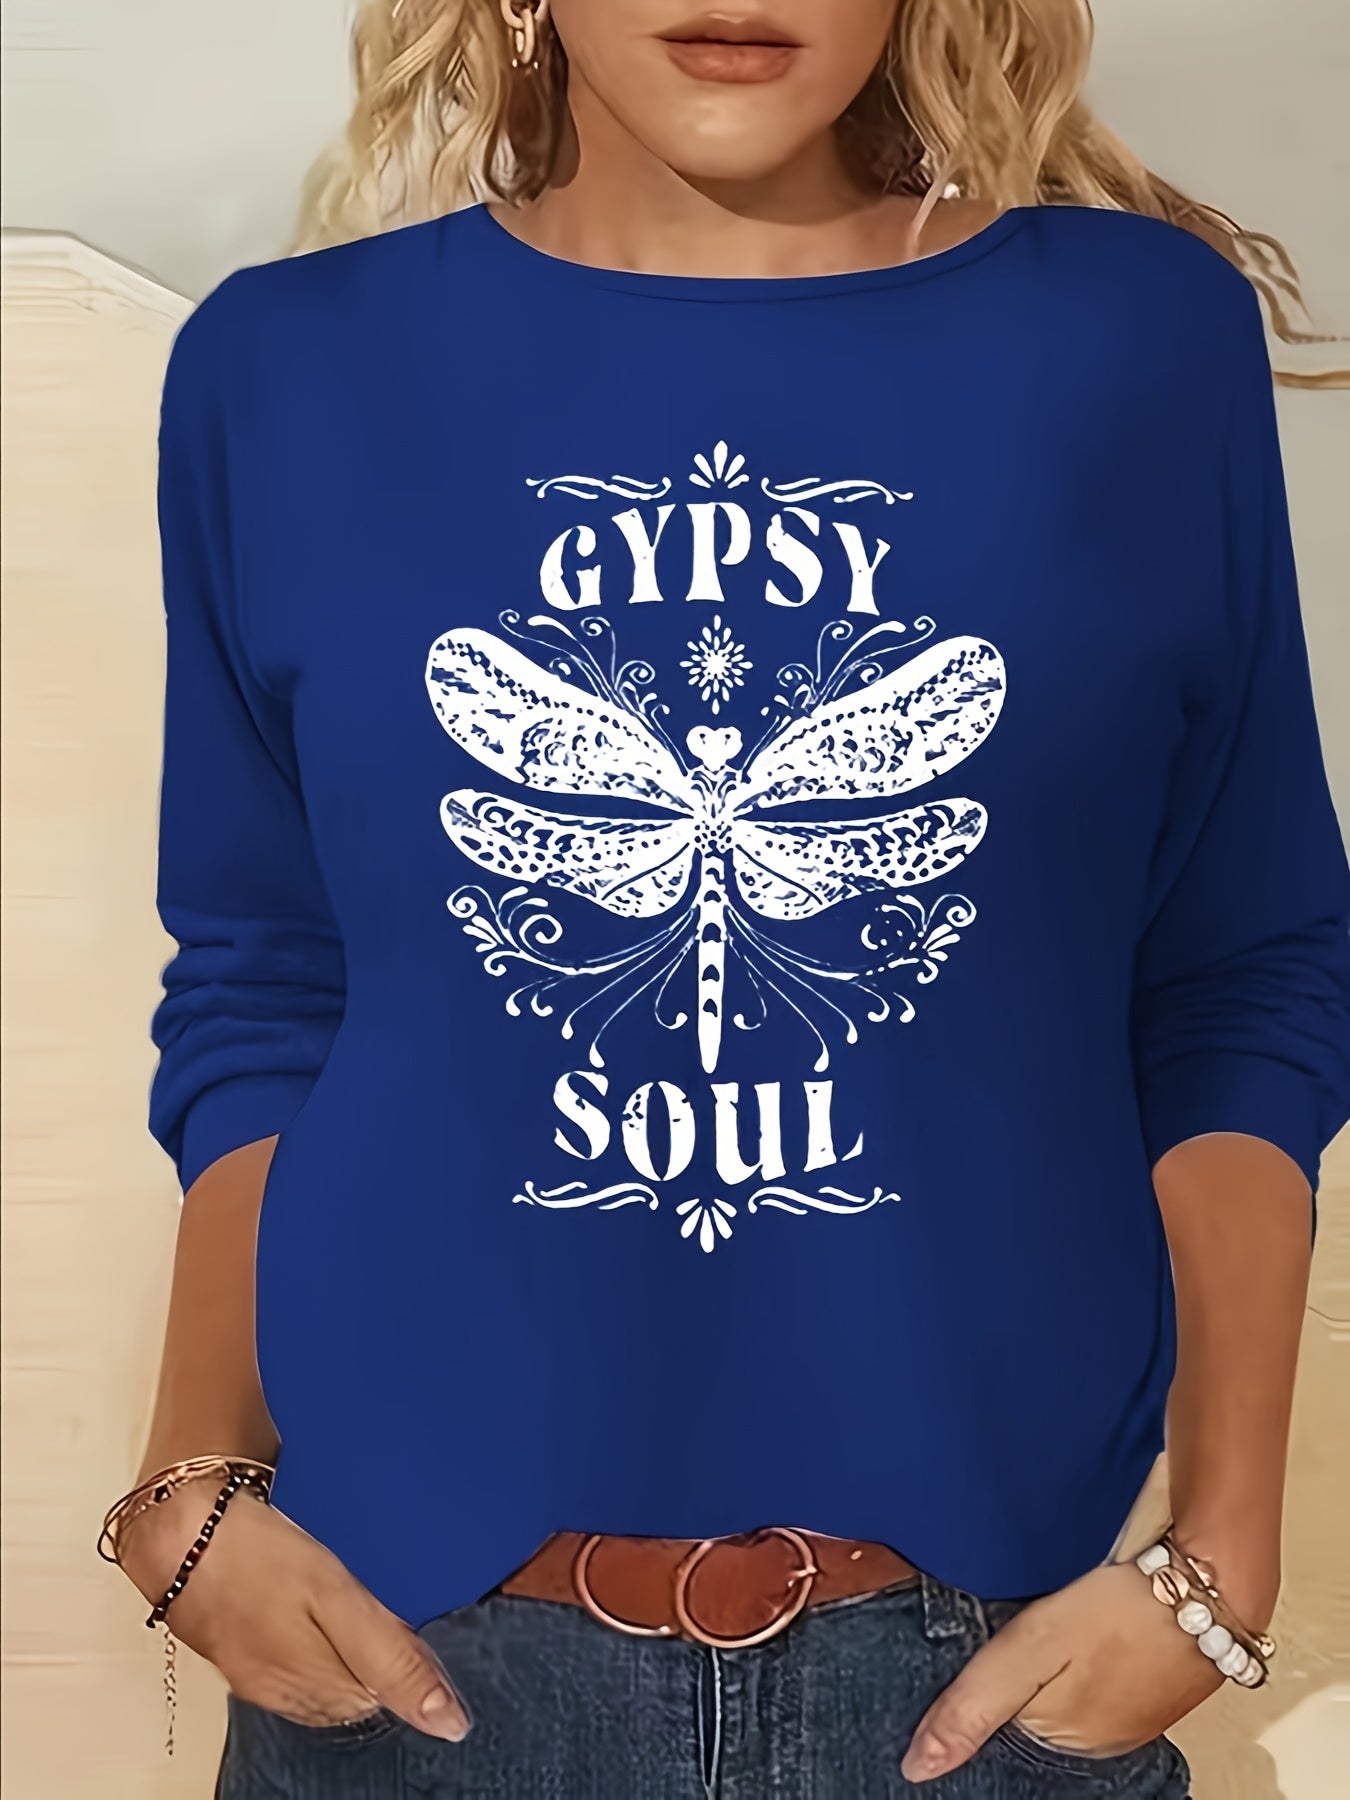 Gypsy Soul Print Long Sleeve T-Shirt, Crew Neck Casual Top